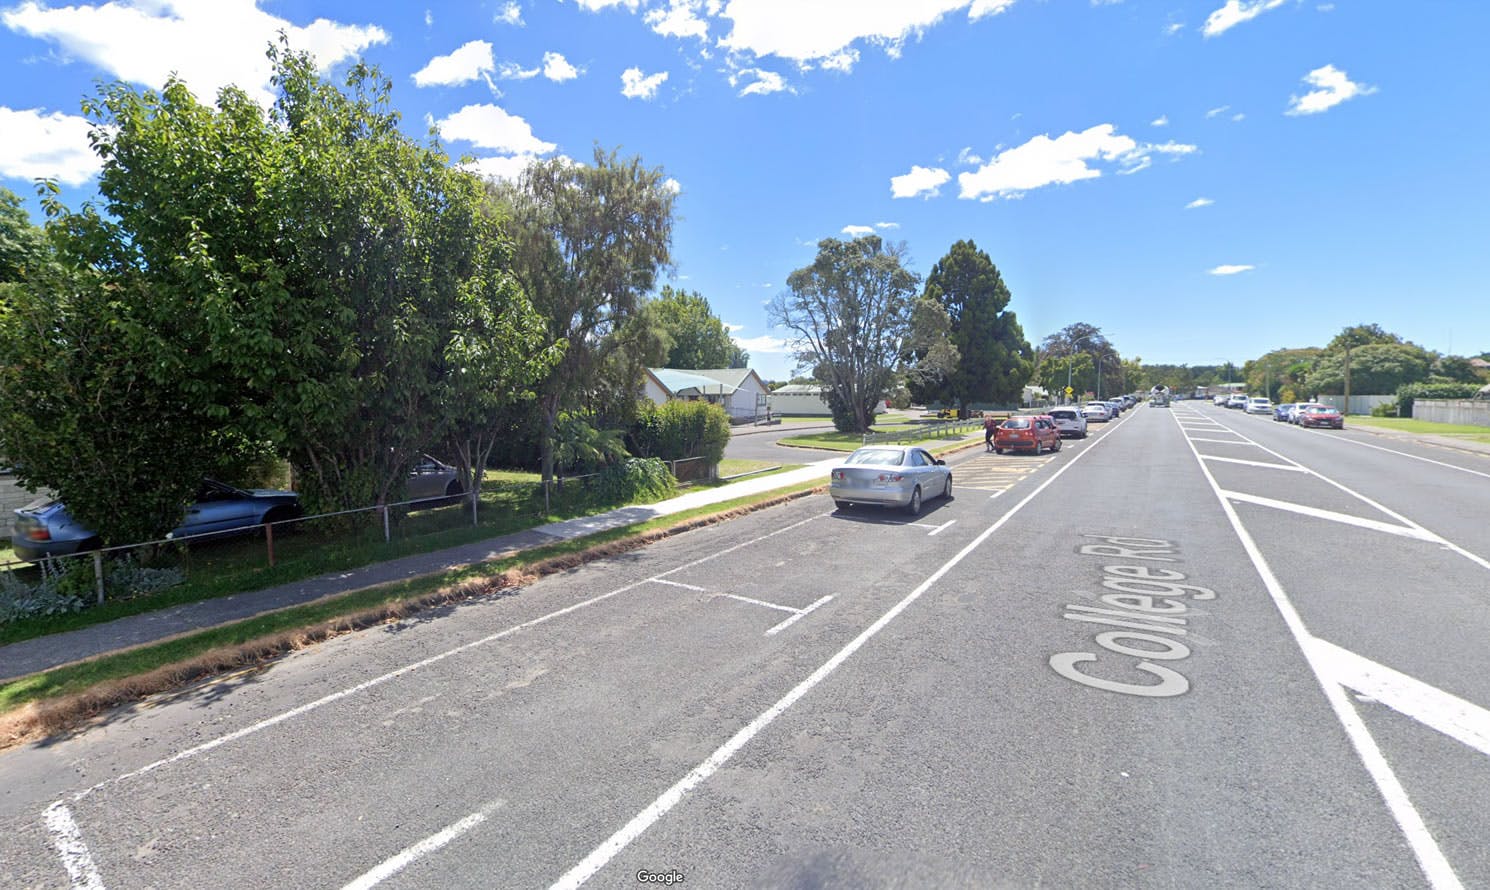 Google Street View of College Road area